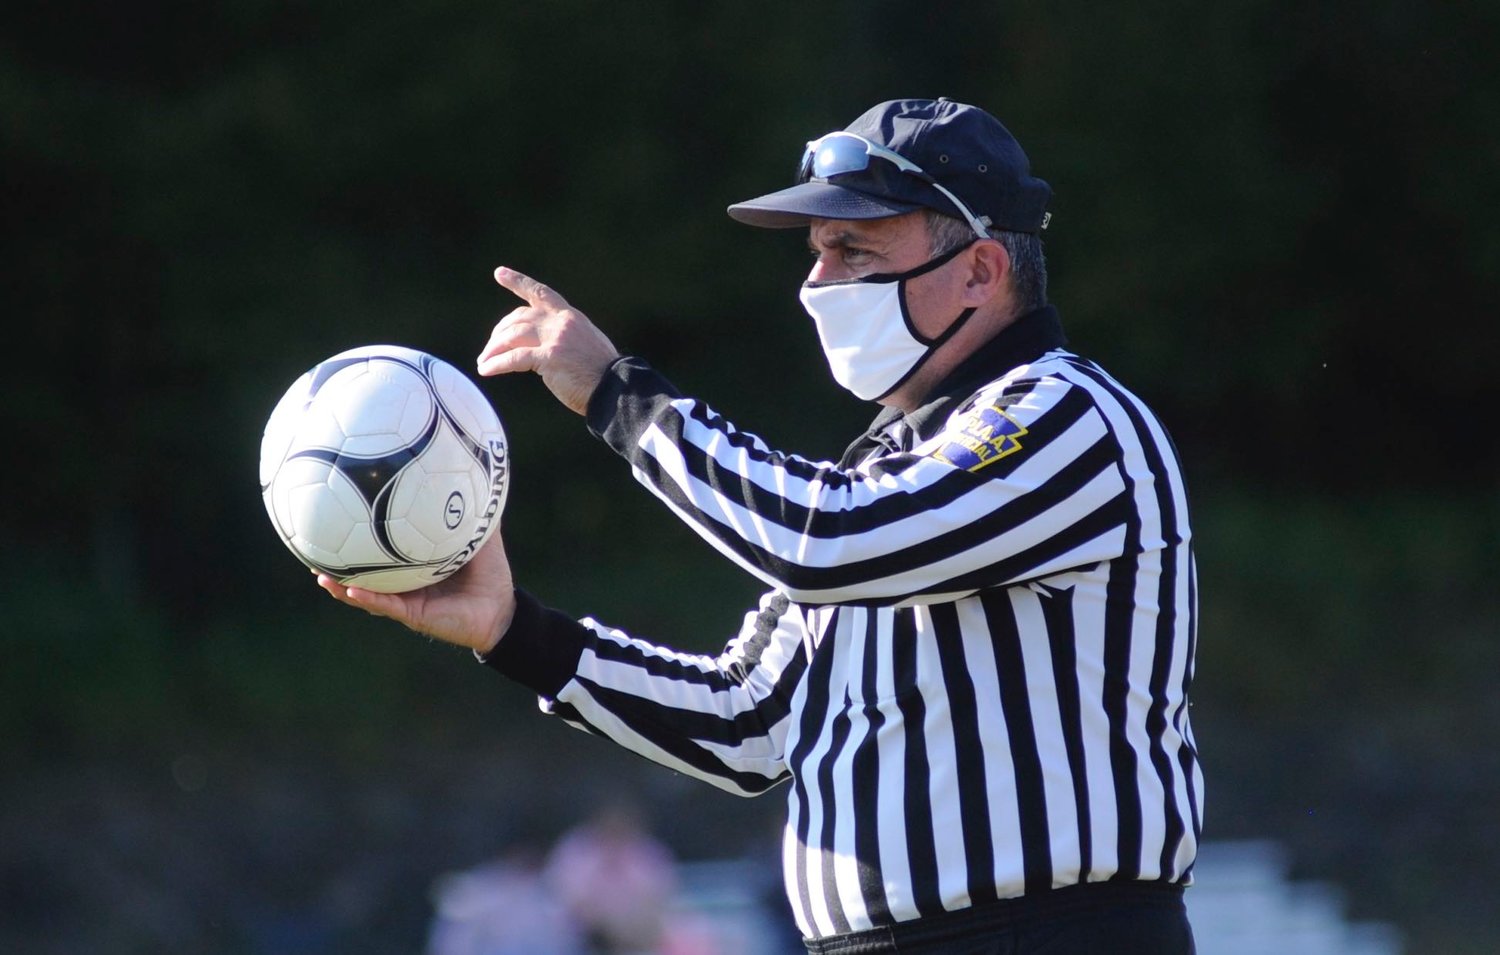 Leading by example. The PIAA officials calling the shots were masked up during the game due to the COVID-19 pandemic.